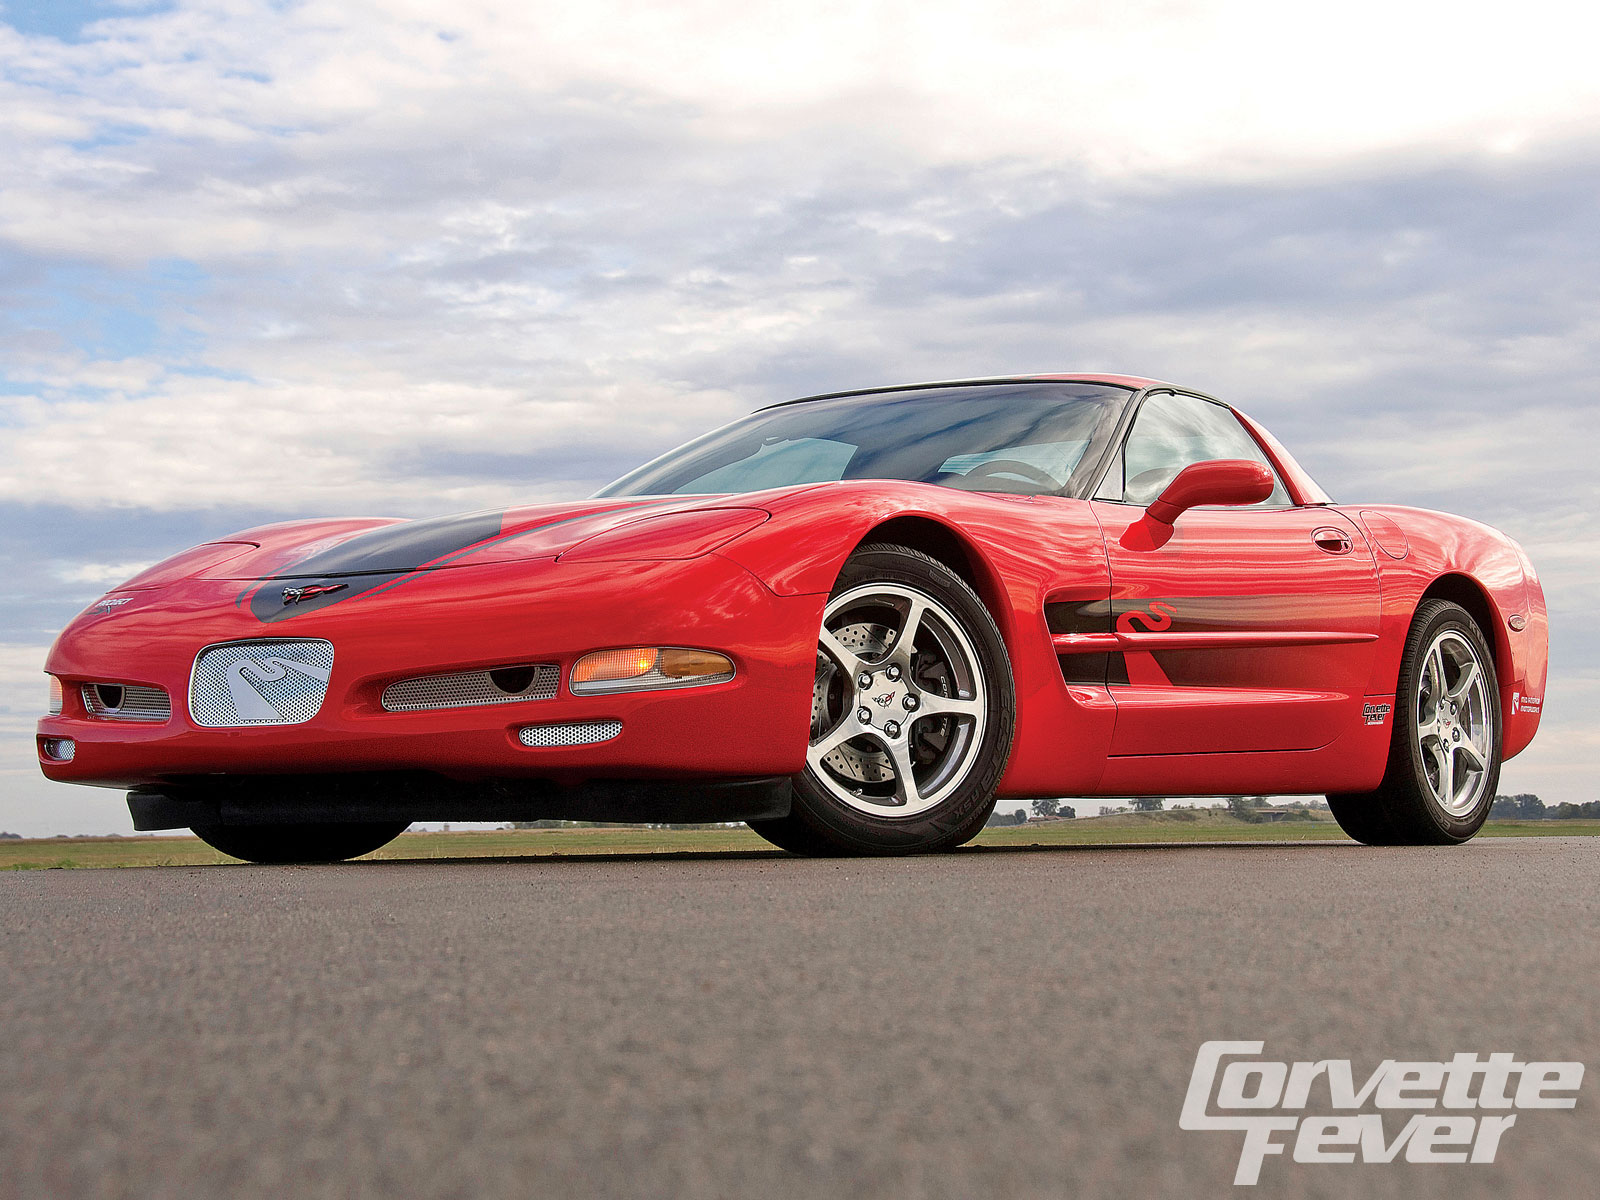 Chevrolet Corvette The End Of Road Photo Gallery